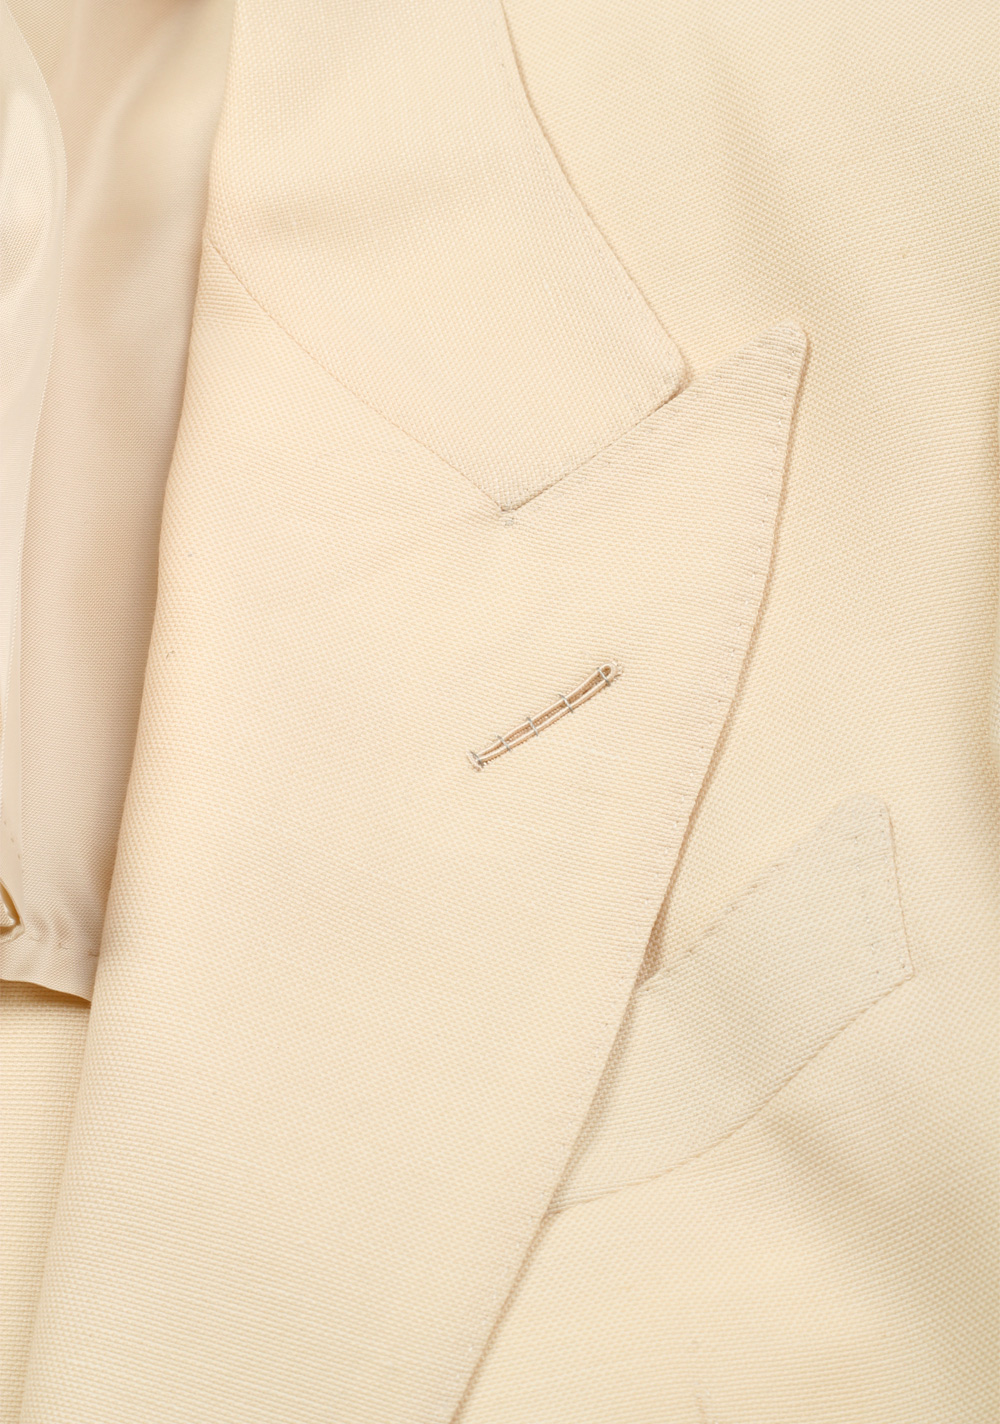 TOM FORD Shelton Cream Suit Size 48 / 38R U.S. In Wool Linen Mohair | Costume Limité